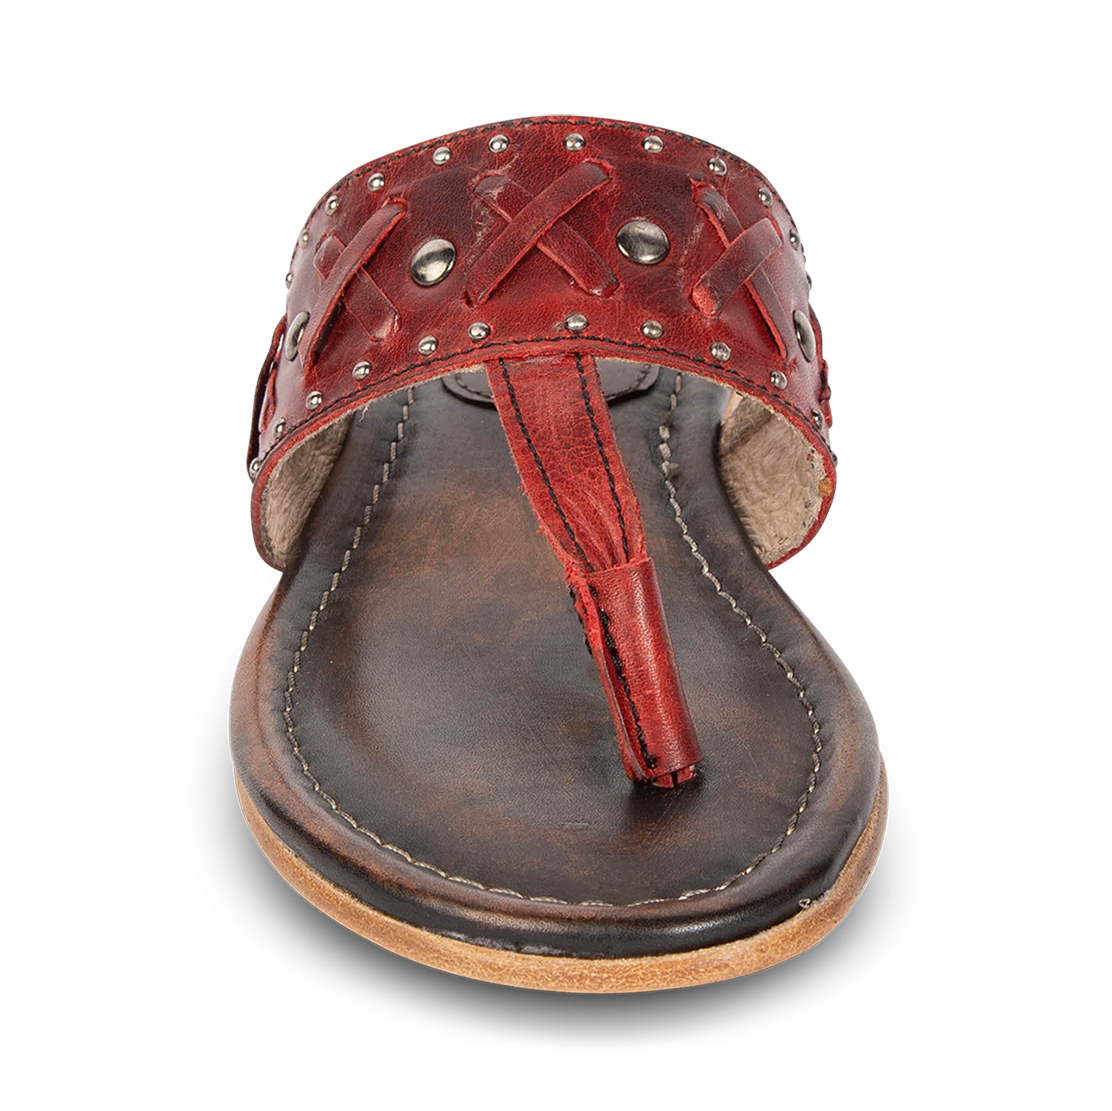 Front view showing FREEBIRD woven leather embellished foot strap on women's Shay red low heeled sandal